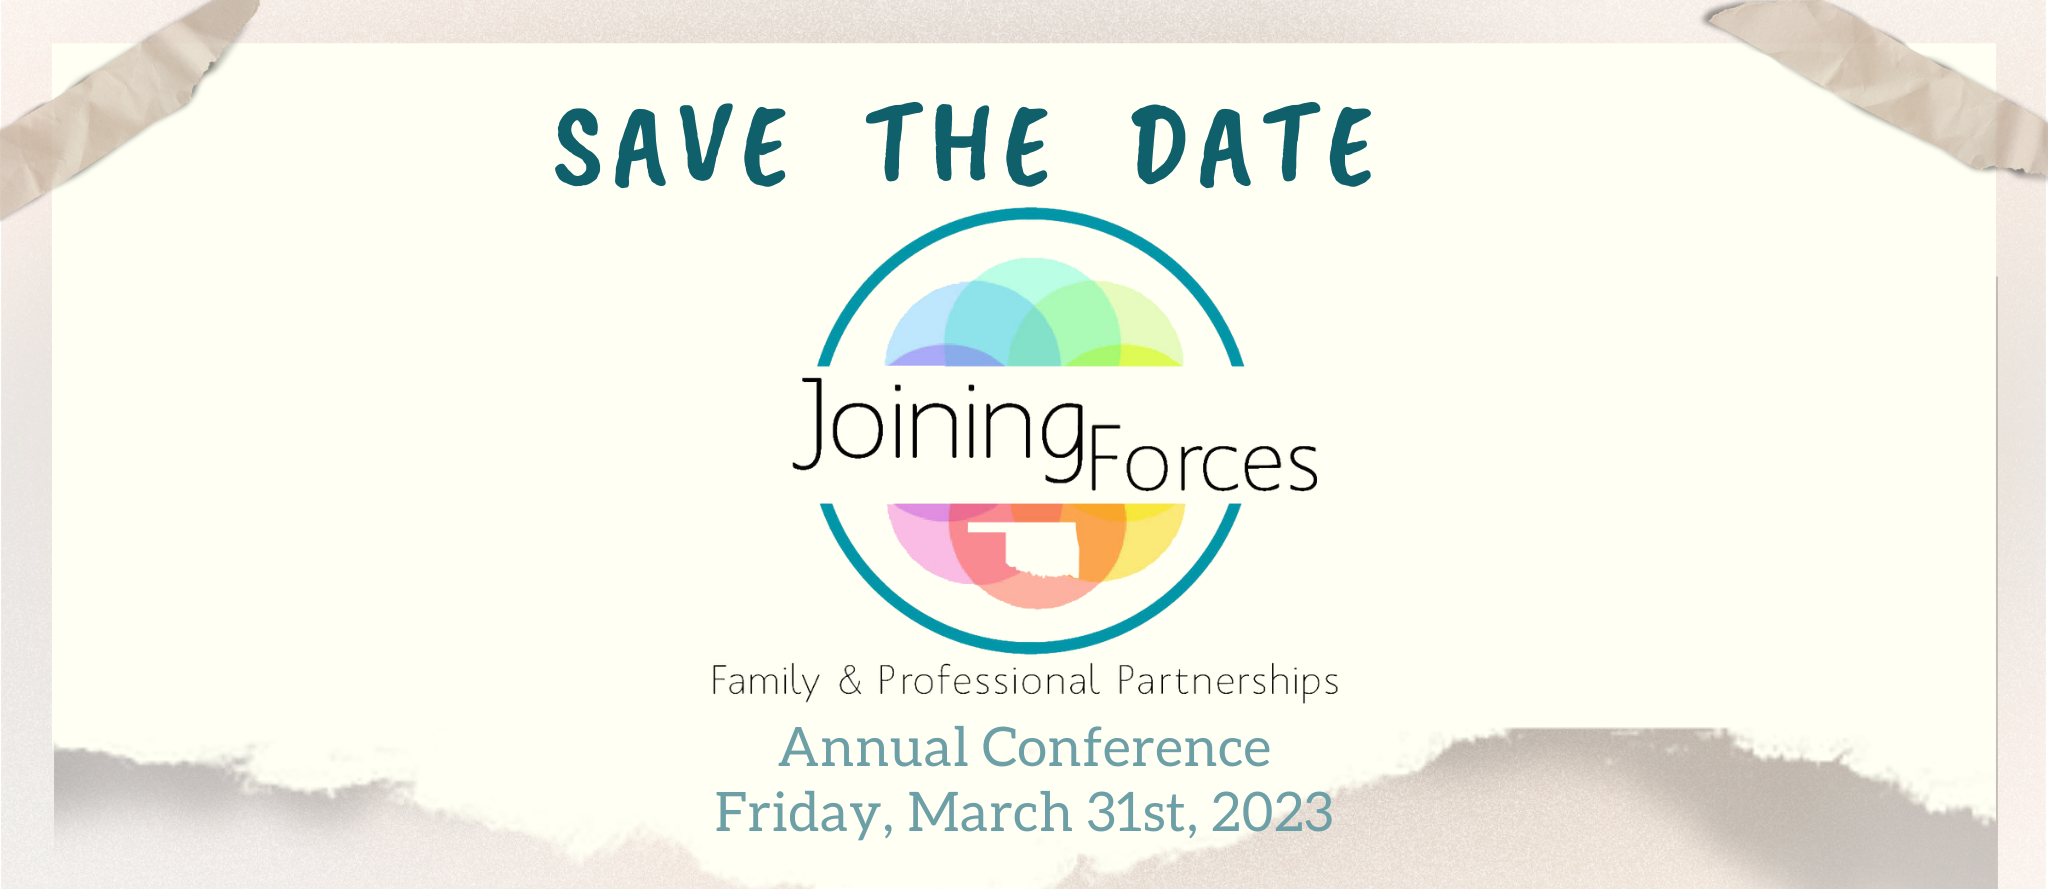 Save the Date Joining Forces Family & Professional Partnerships Annual Conference Friday, March 31st 2023